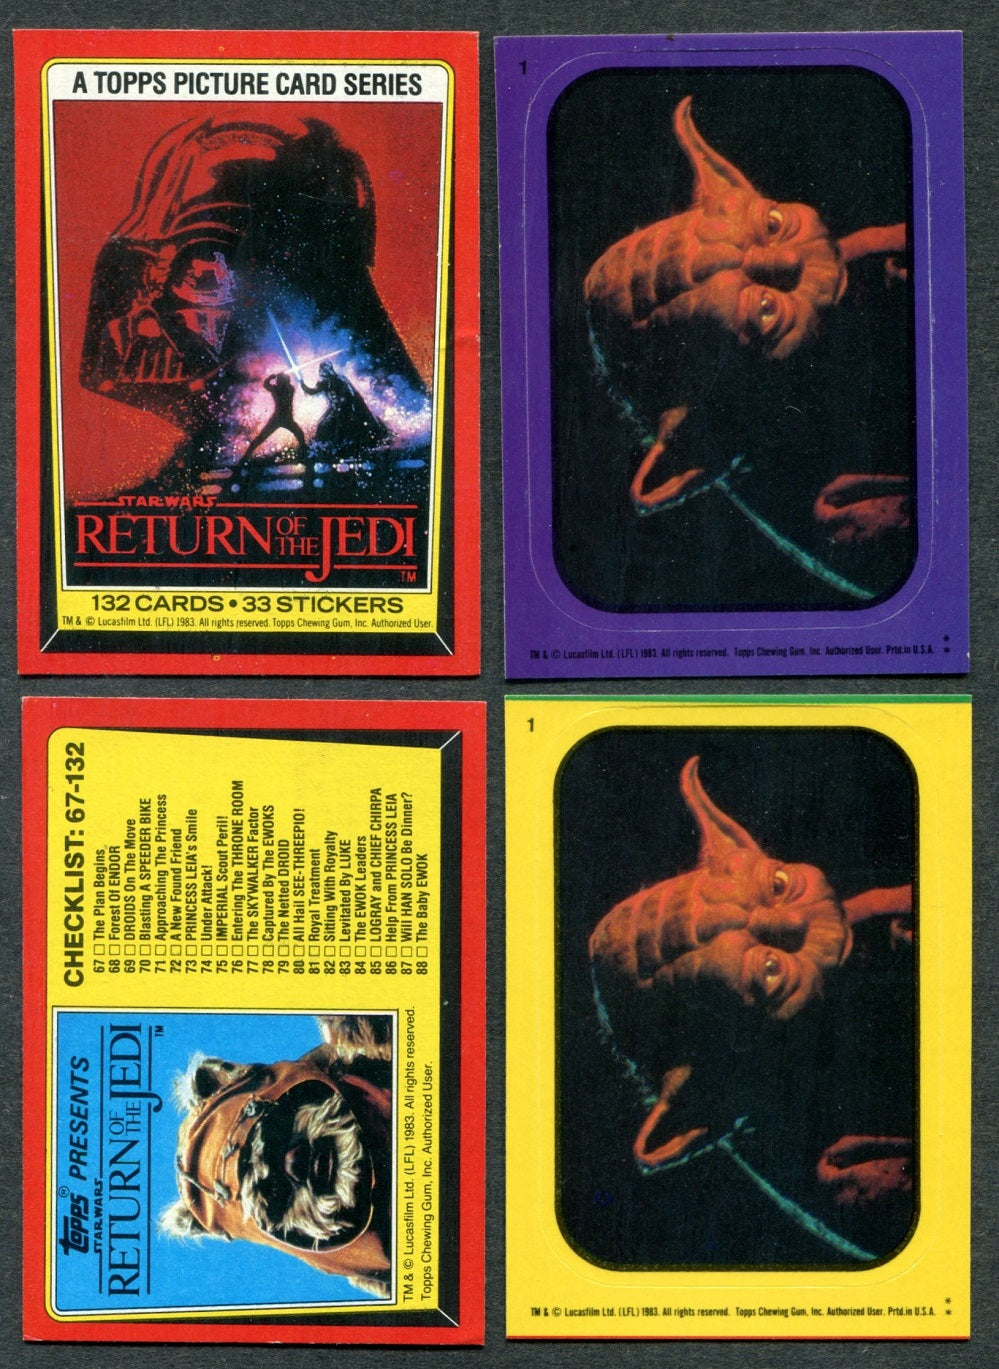 1983 Topps Return Of The Jedi Complete Series 1 Set (w/ stickers) (132/33/33) NM NM/MT